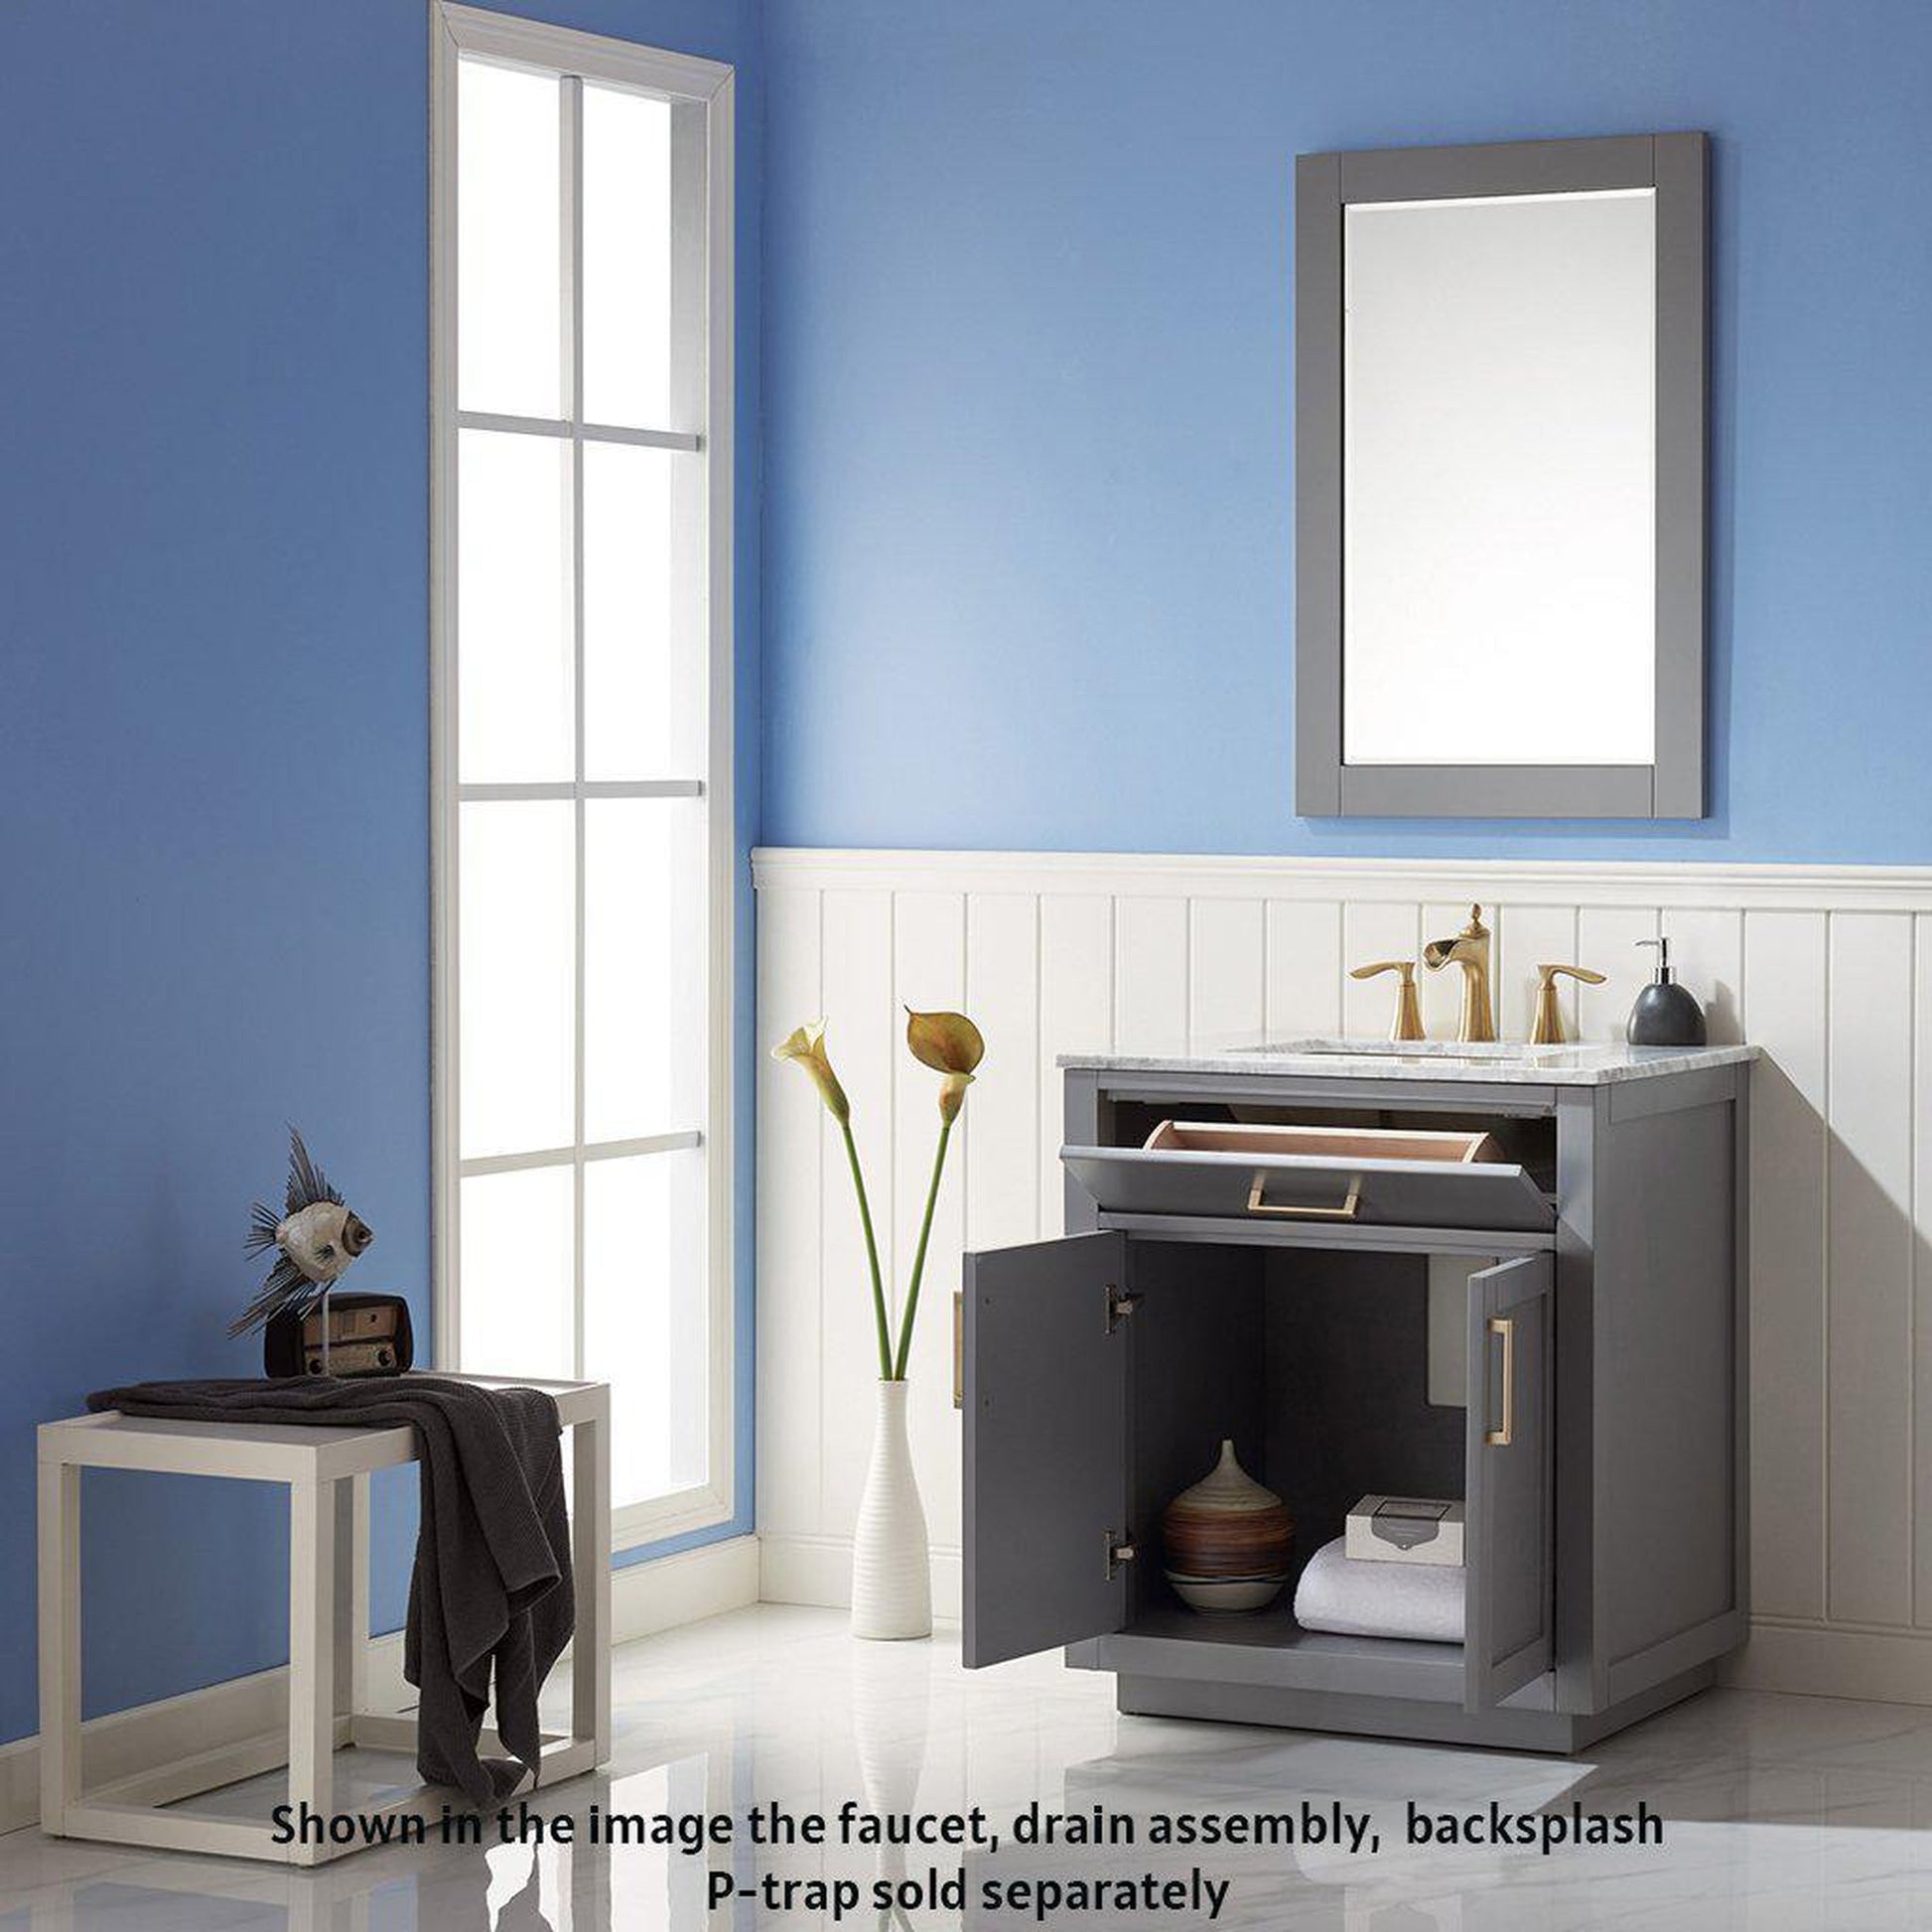 Altair Ivy 30" Single Gray Freestanding Bathroom Vanity Set With Mirror, Natural Carrara White Marble Top, Rectangular Undermount Ceramic Sink, and Overflow